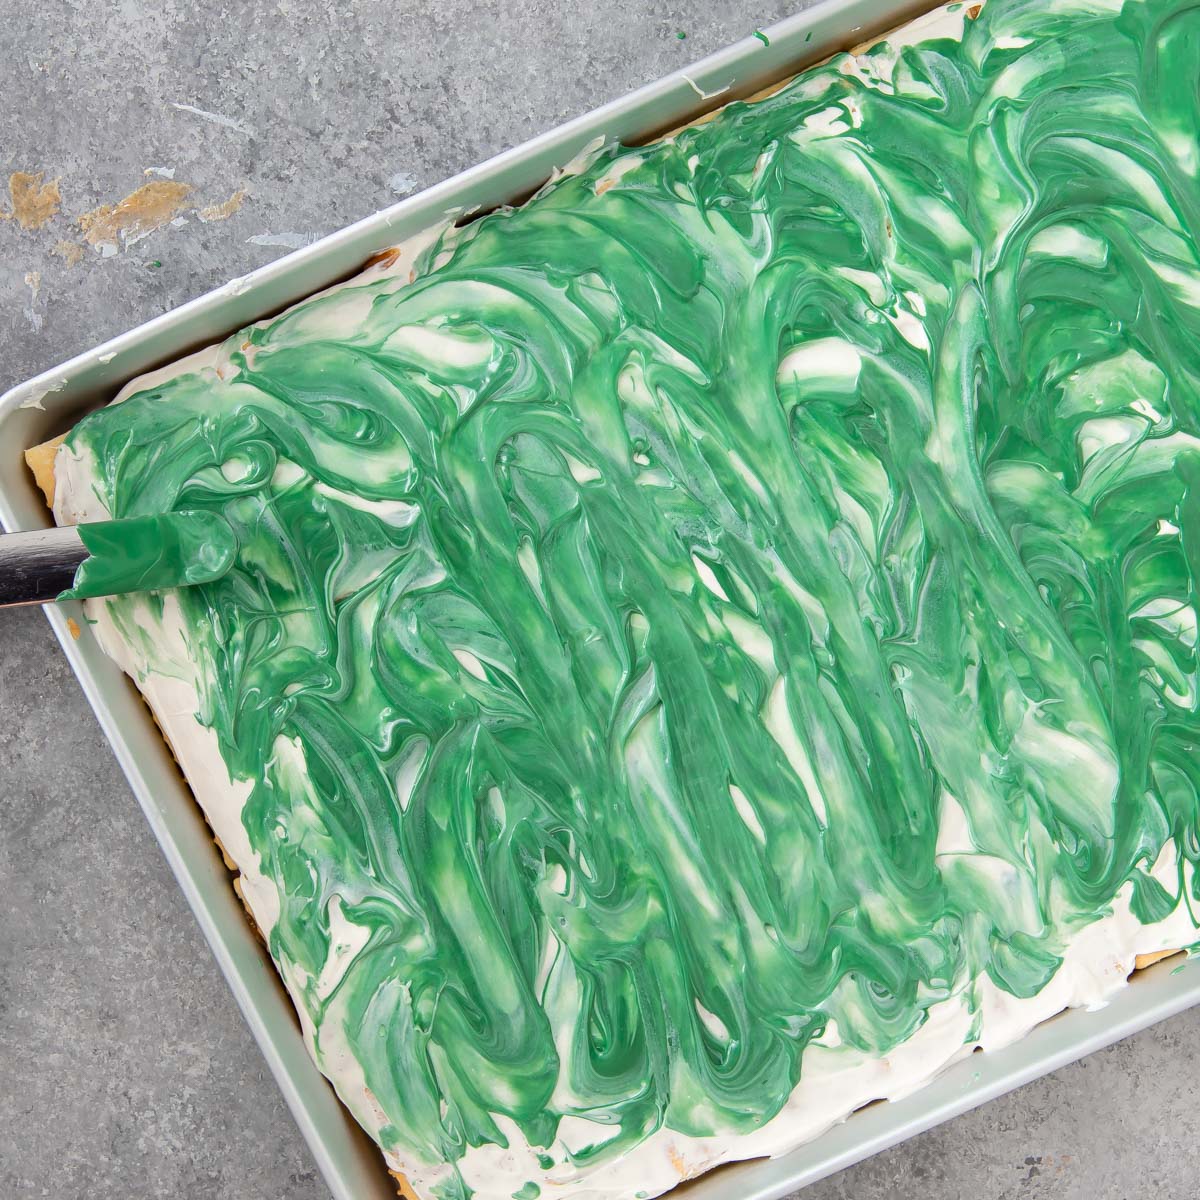 swirling green melted chocolate on top of white chocolate for toffee bars